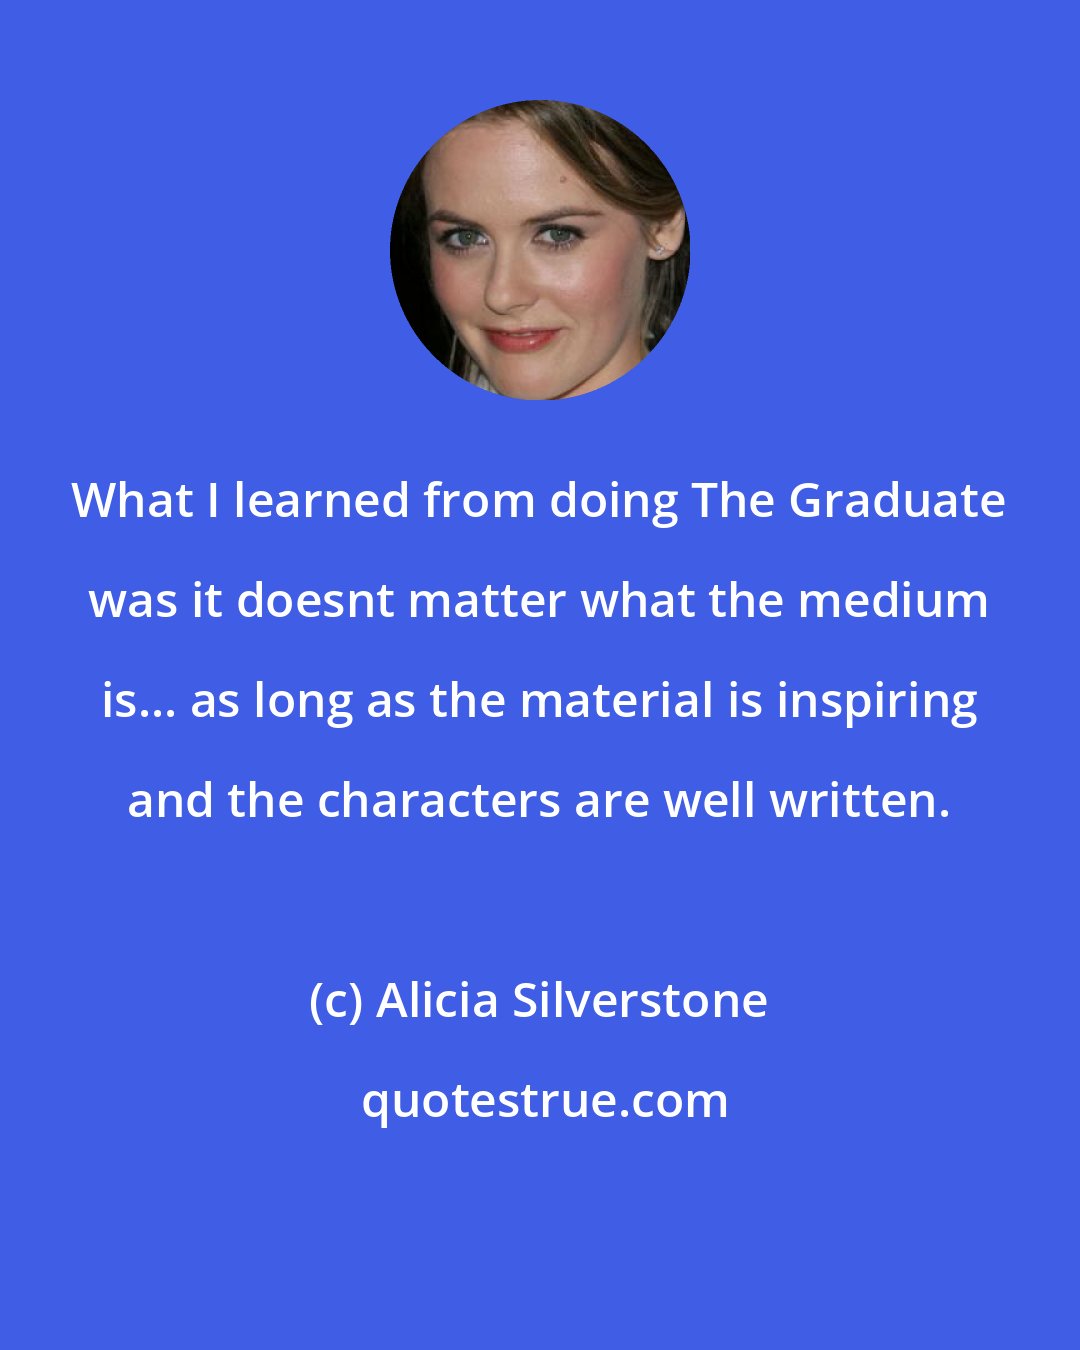 Alicia Silverstone: What I learned from doing The Graduate was it doesnt matter what the medium is... as long as the material is inspiring and the characters are well written.